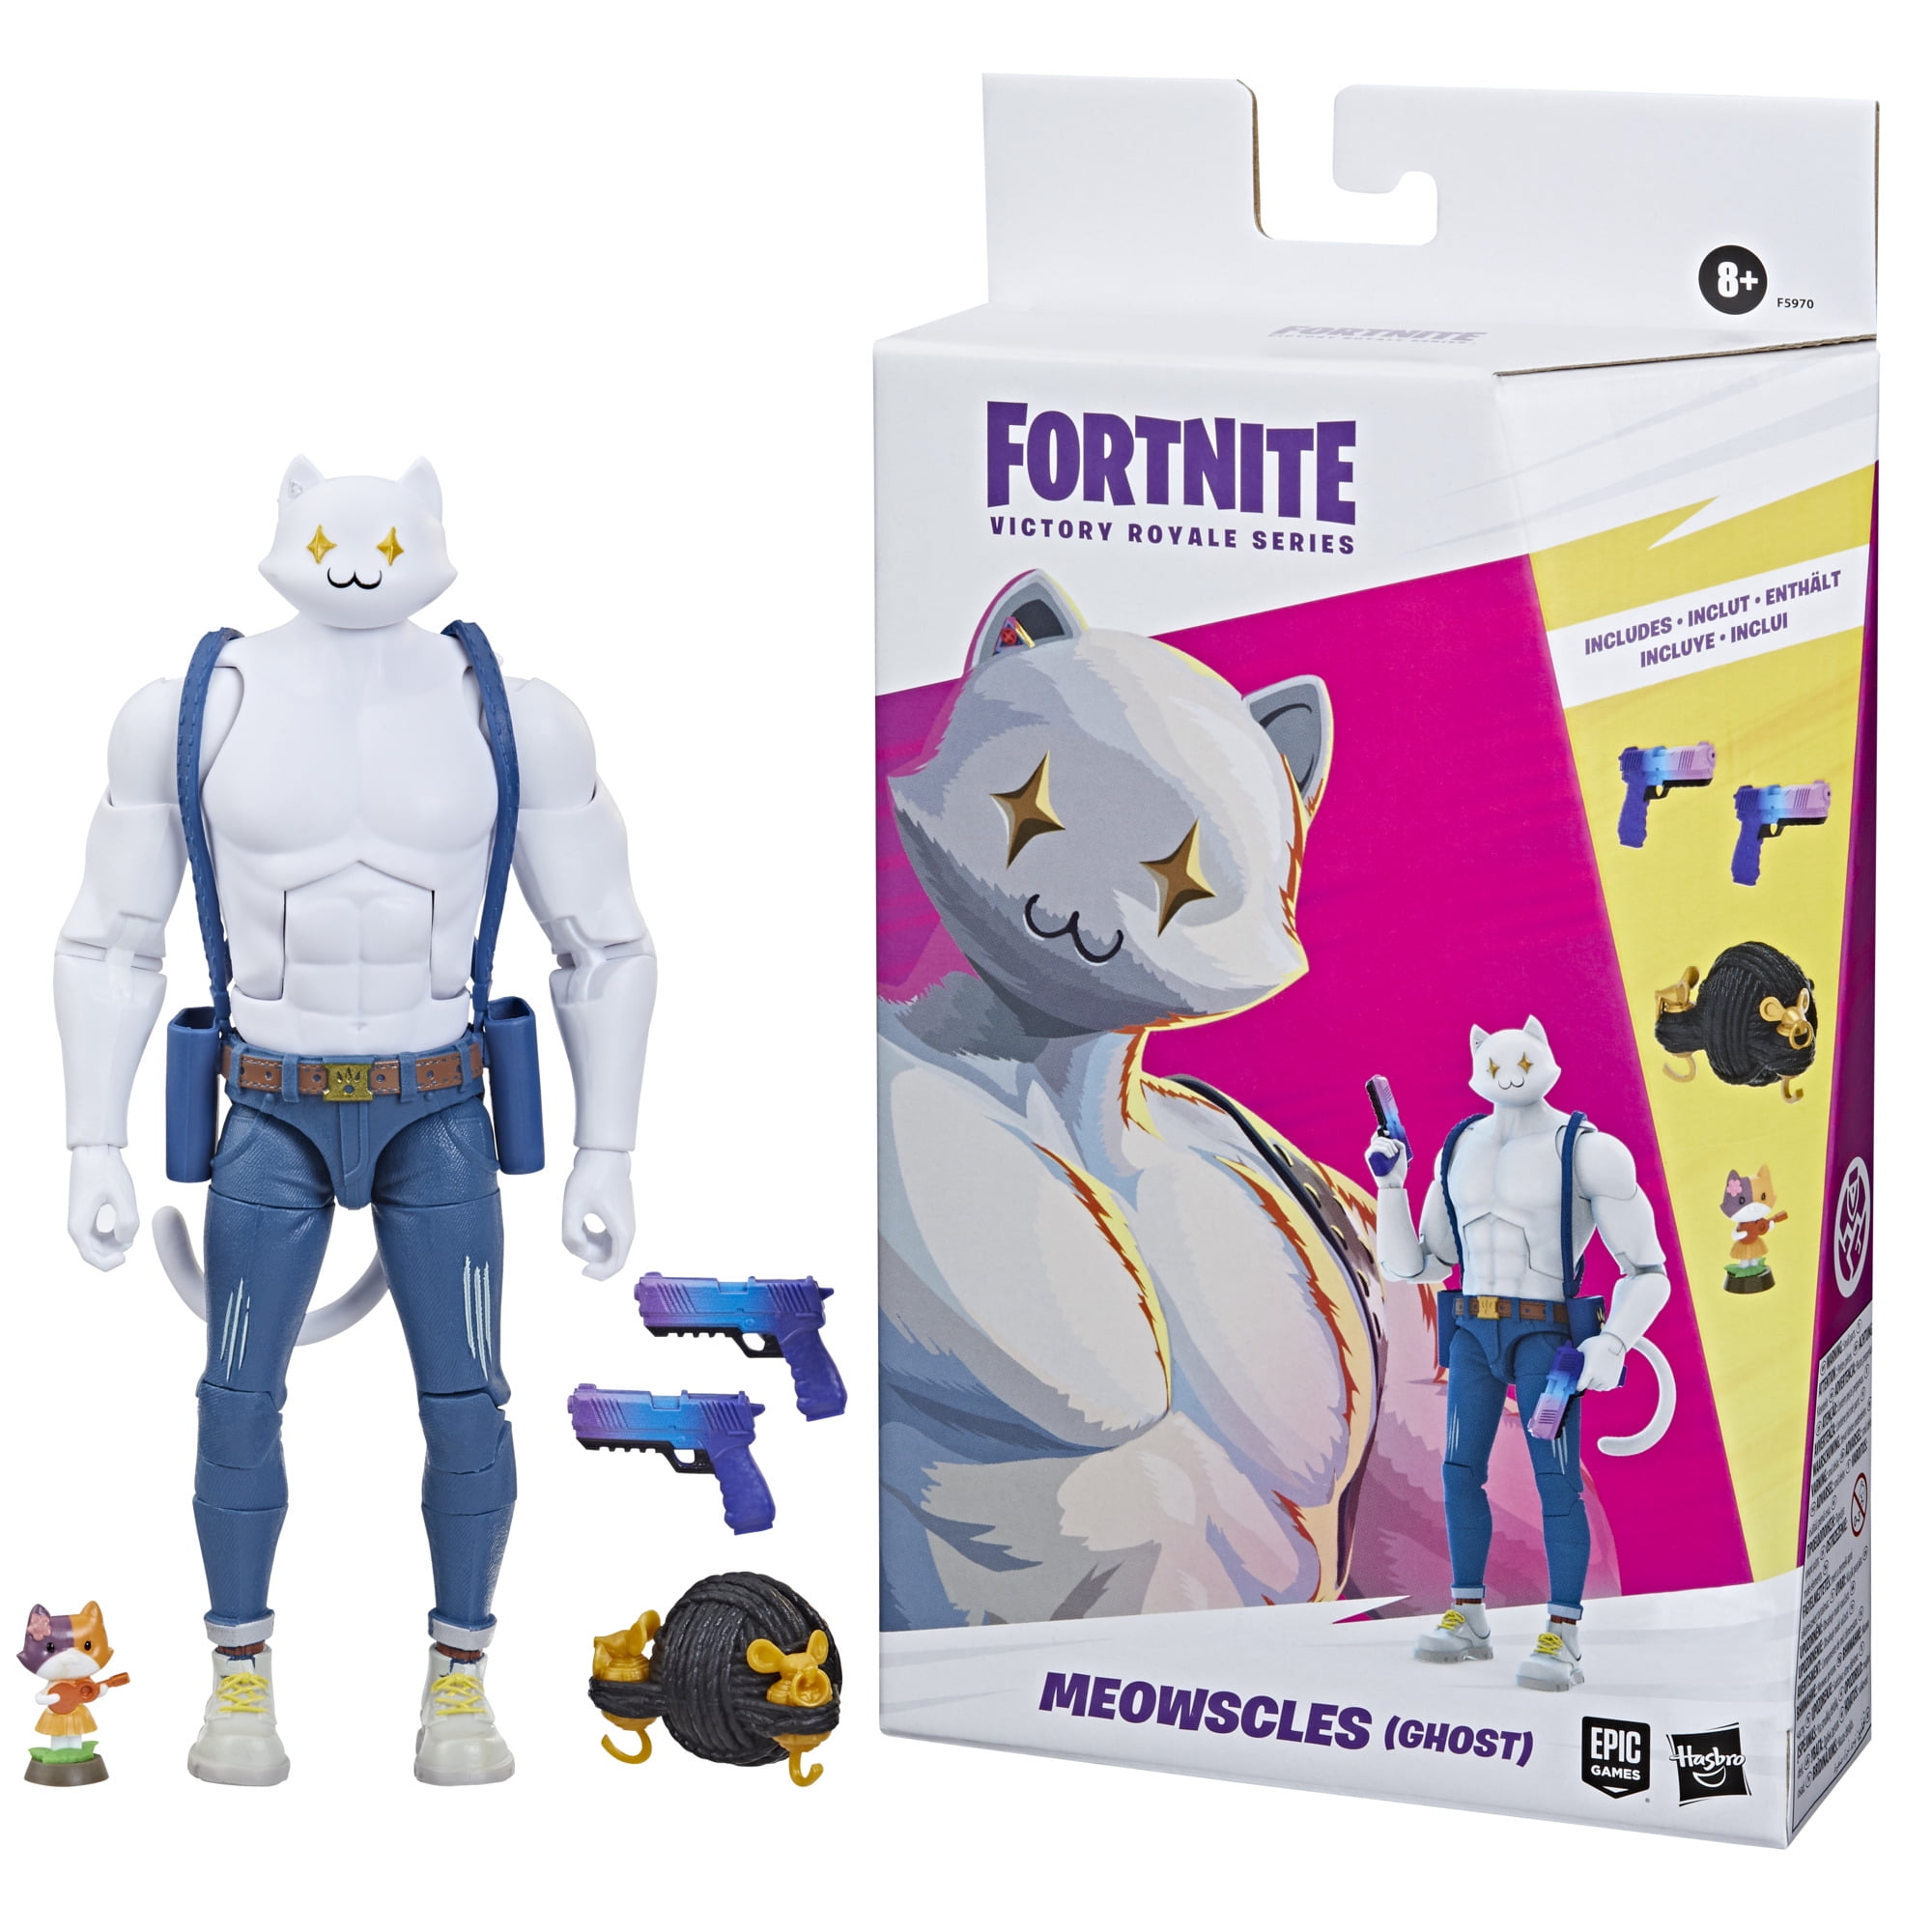 Fortnite Victory Royale Series Meowscles (Ghost) Action Figure